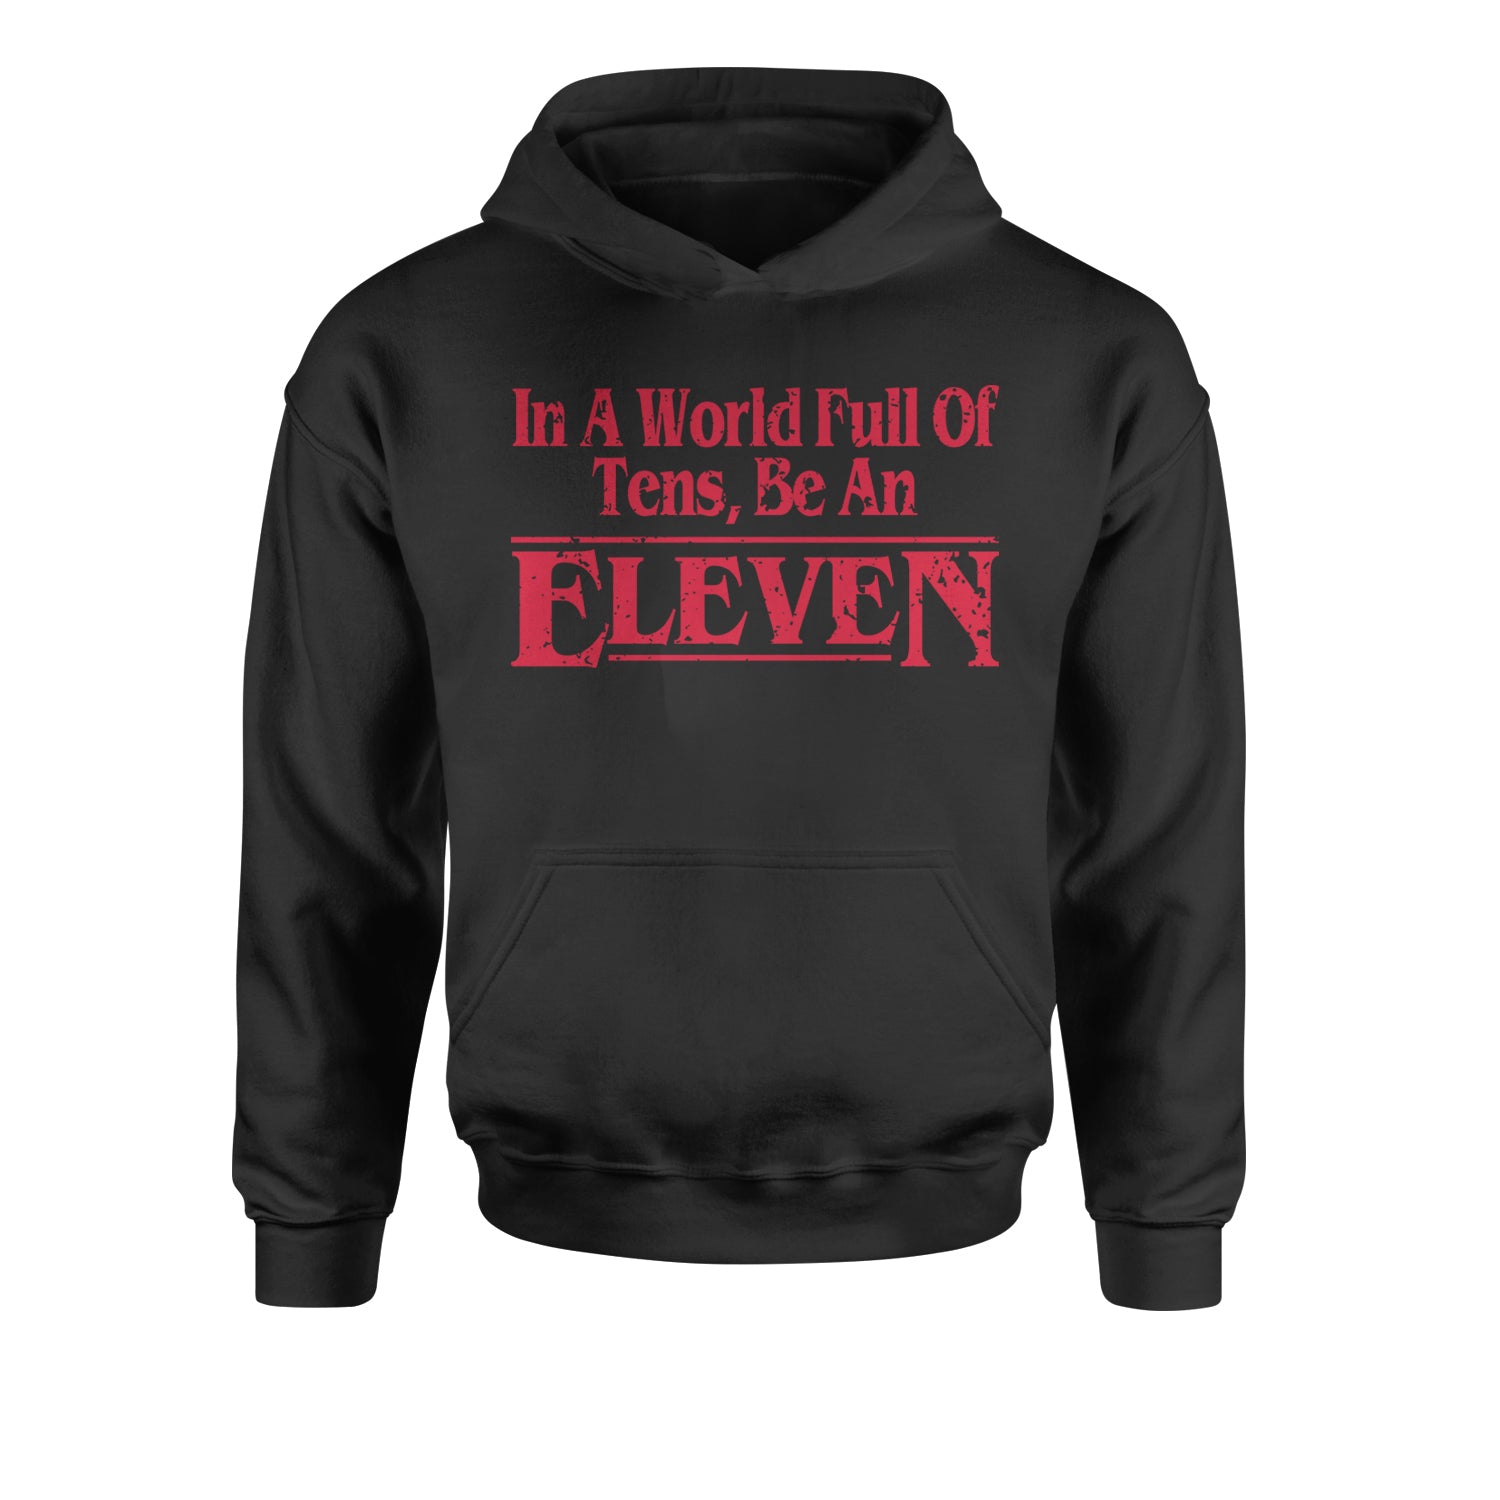 In A World Full Of Tens, Be An Eleven Youth-Sized Hoodie